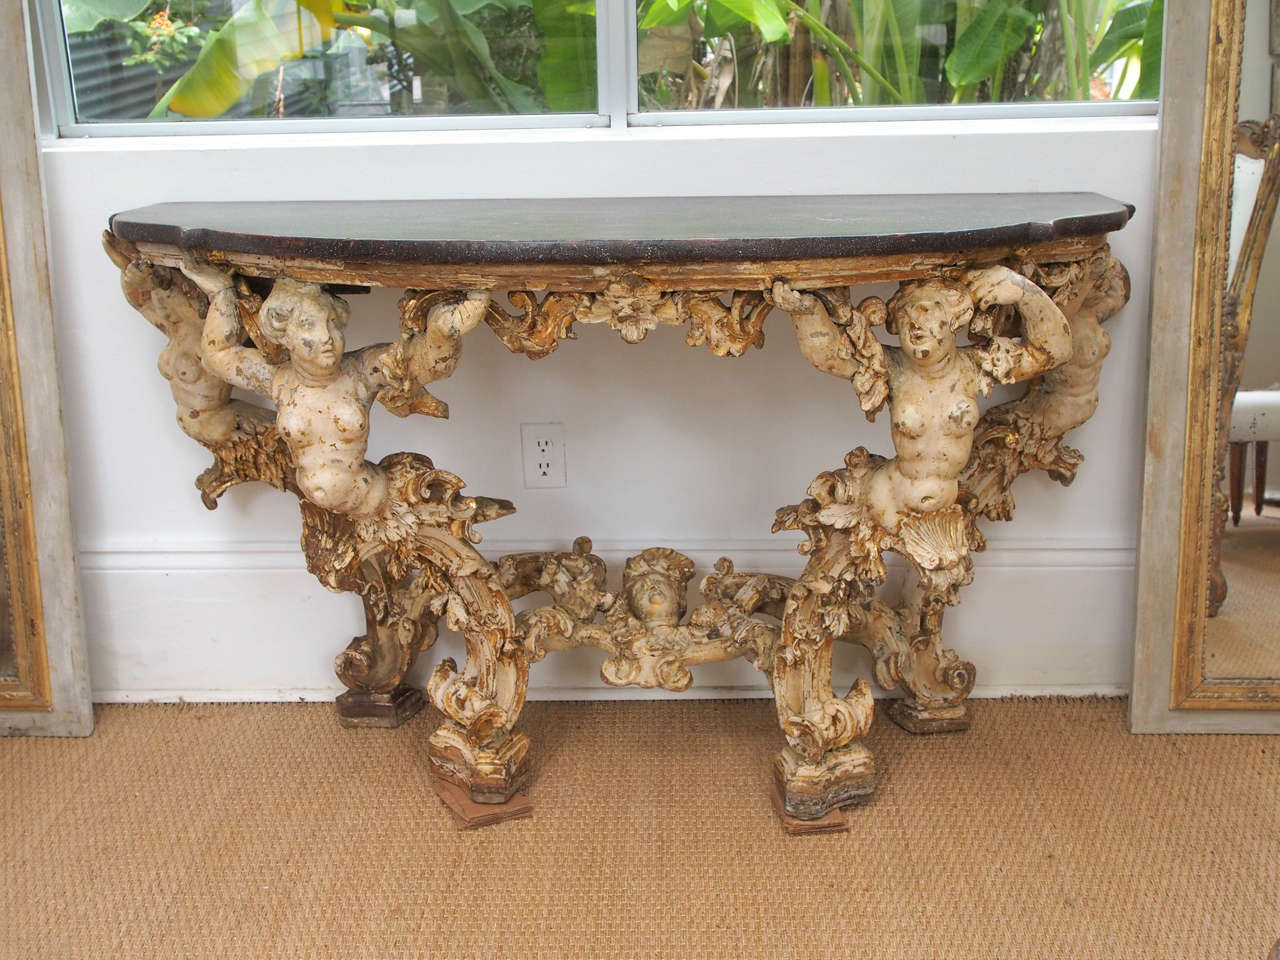 Very carved, some gilt and paint
top is painted wood